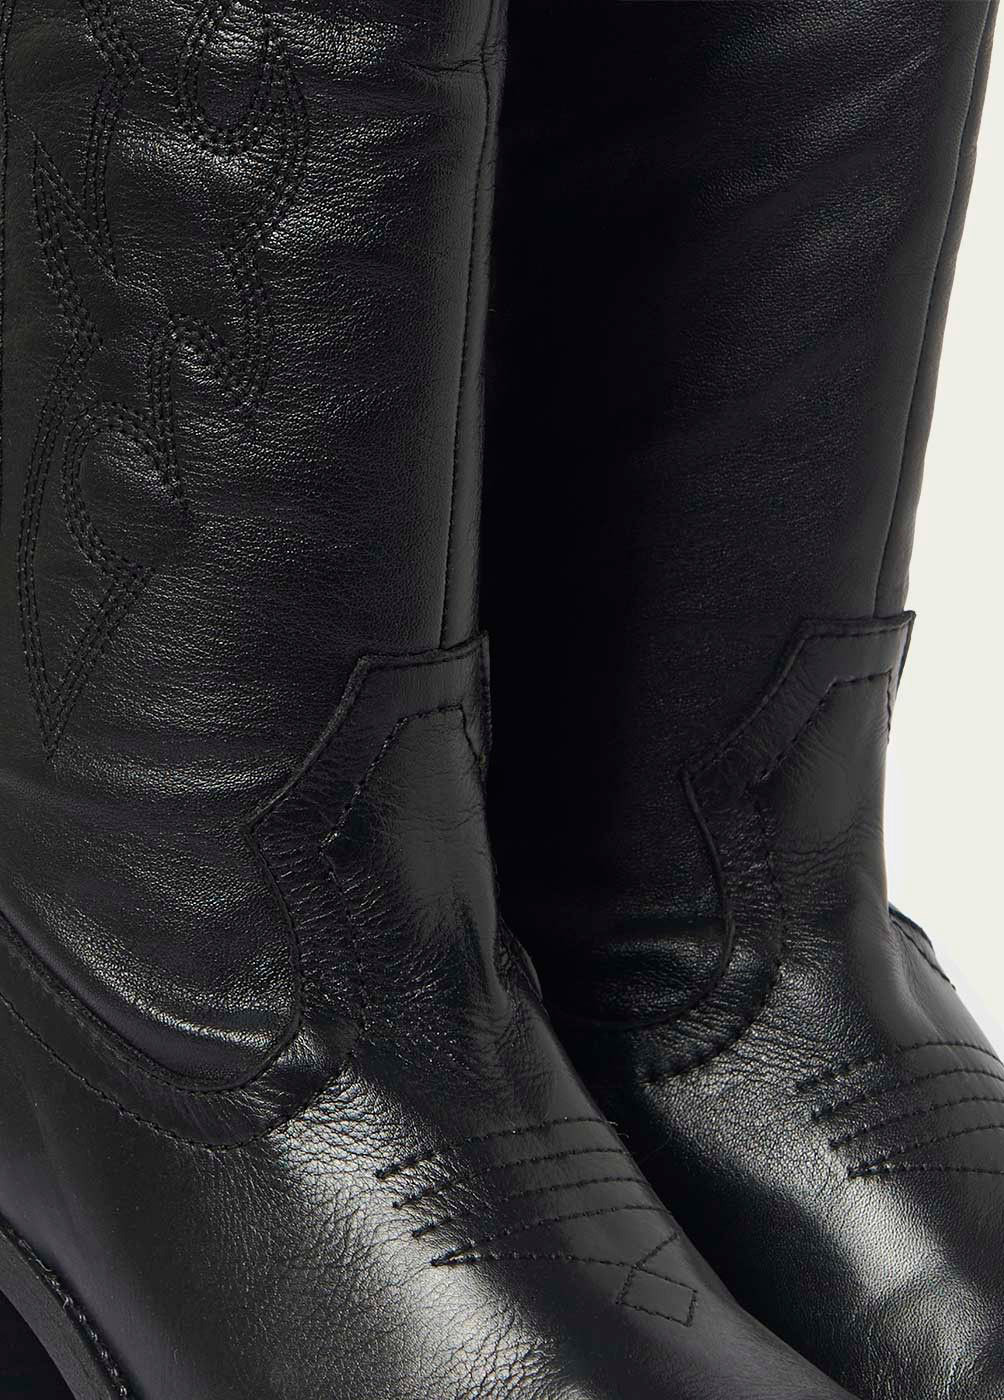 WESTERN-STYLE BOOTS WITH STITCH DETAIL